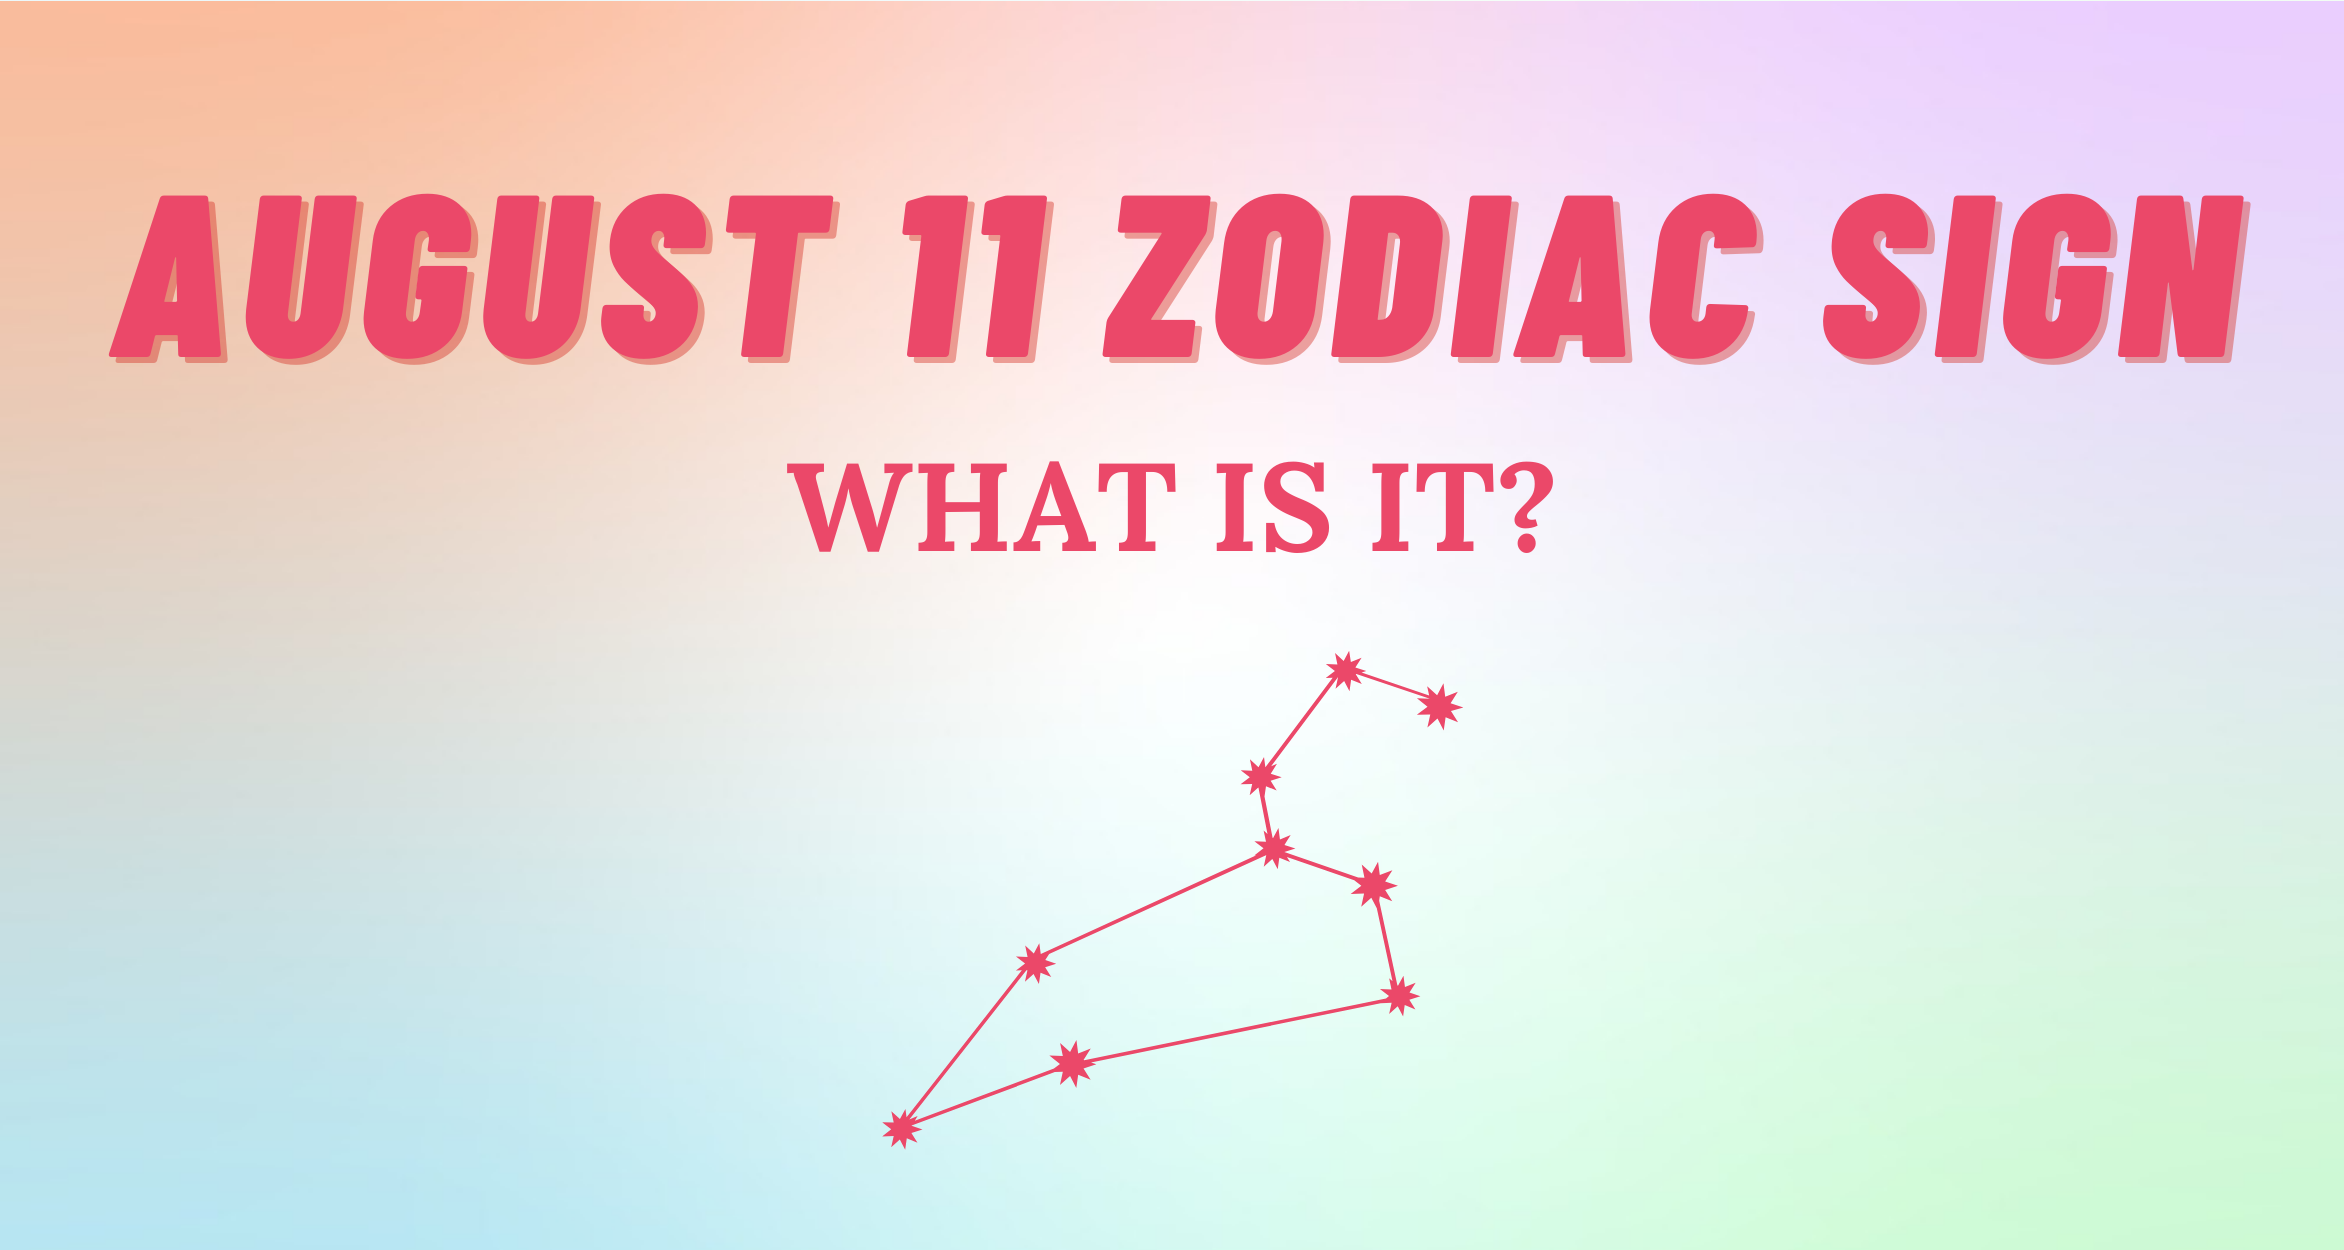 August 11 Zodiac Sign Explained | So Syncd